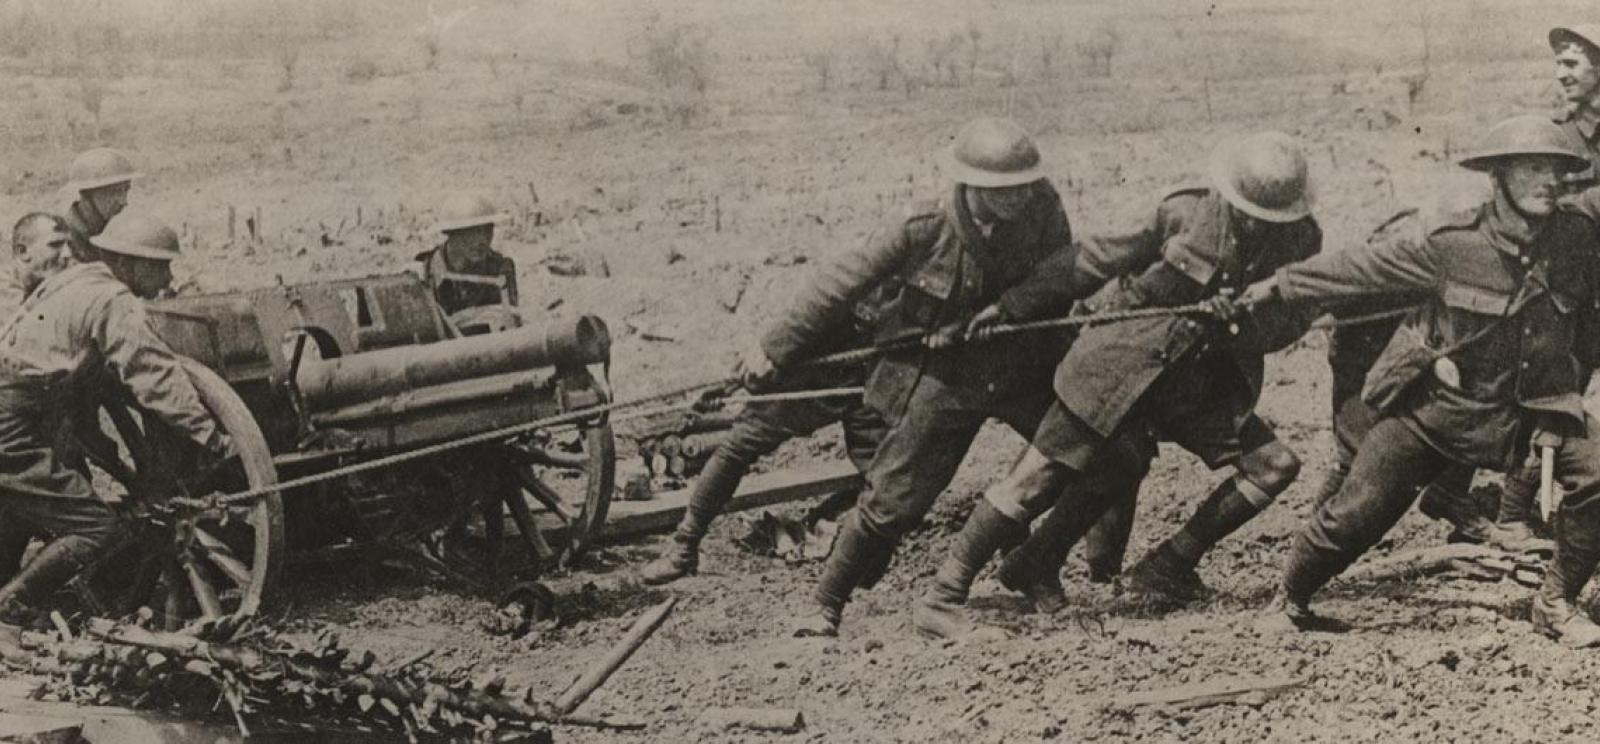 Black and white photograph of a group of men pulling and pushing a field gun.